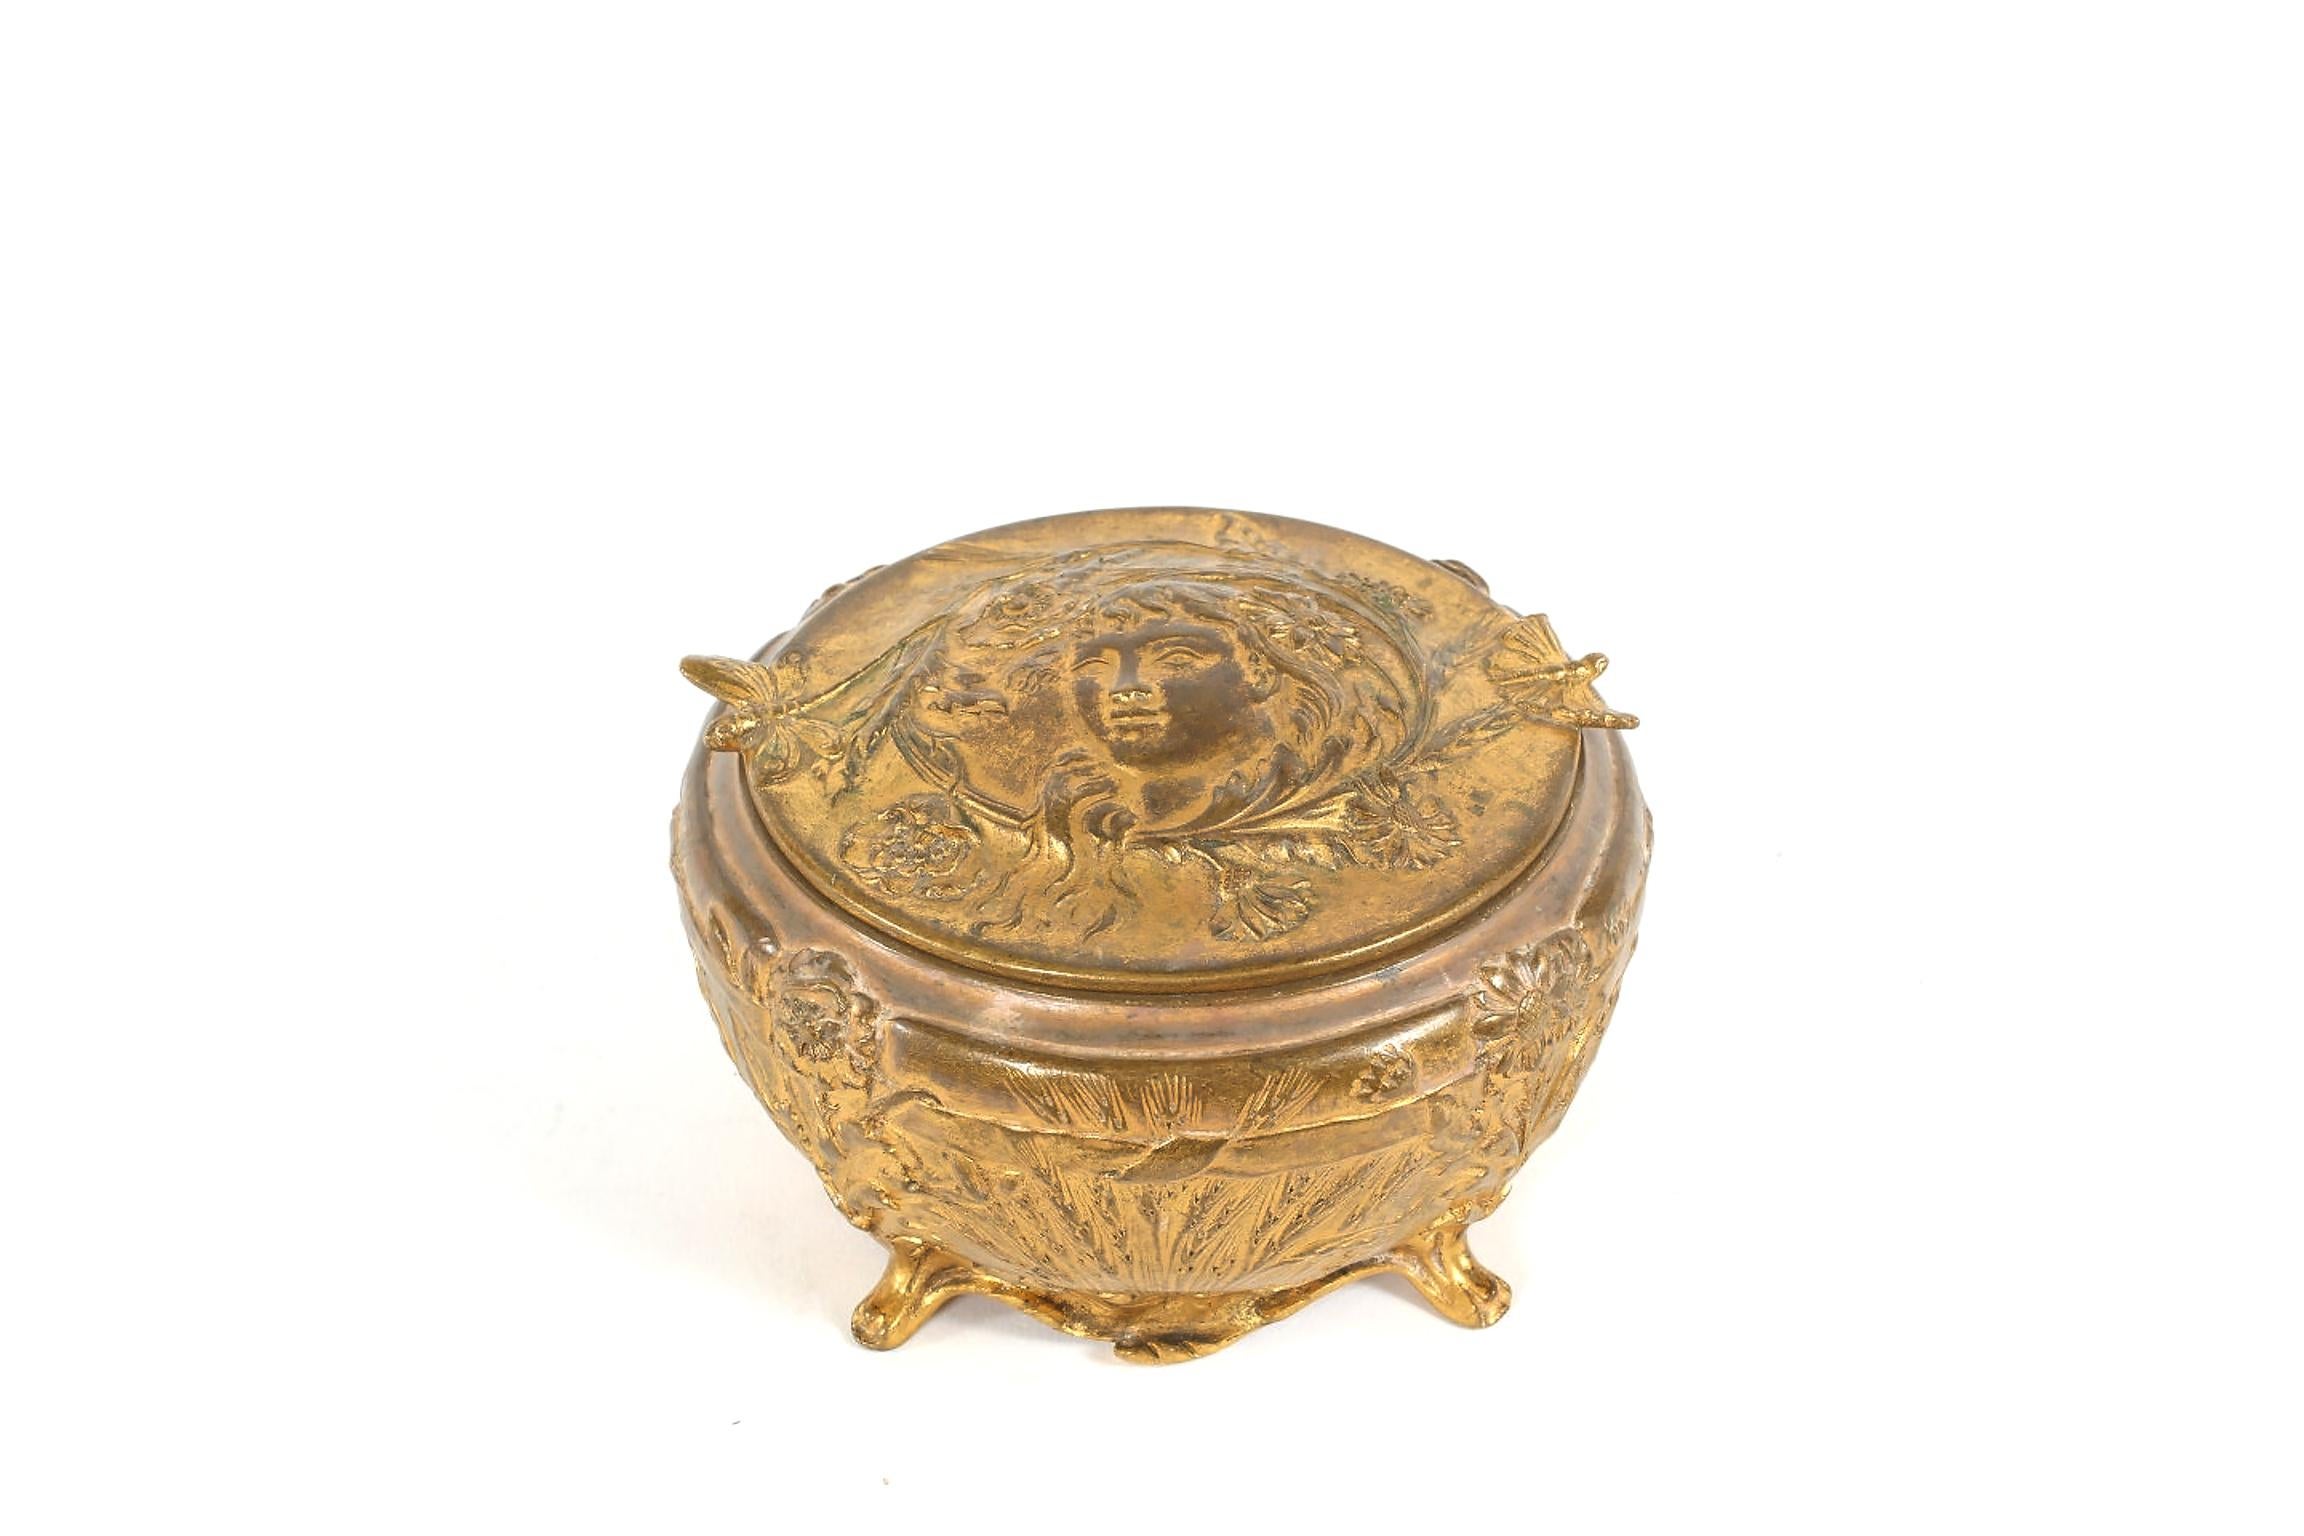 Late 19th century Art Nouveau bronze covered decorative box with exterior design details. The box is in great antique condition with wear appropriate with age / use. Maker's mark inscribed. The box measure about 4.5